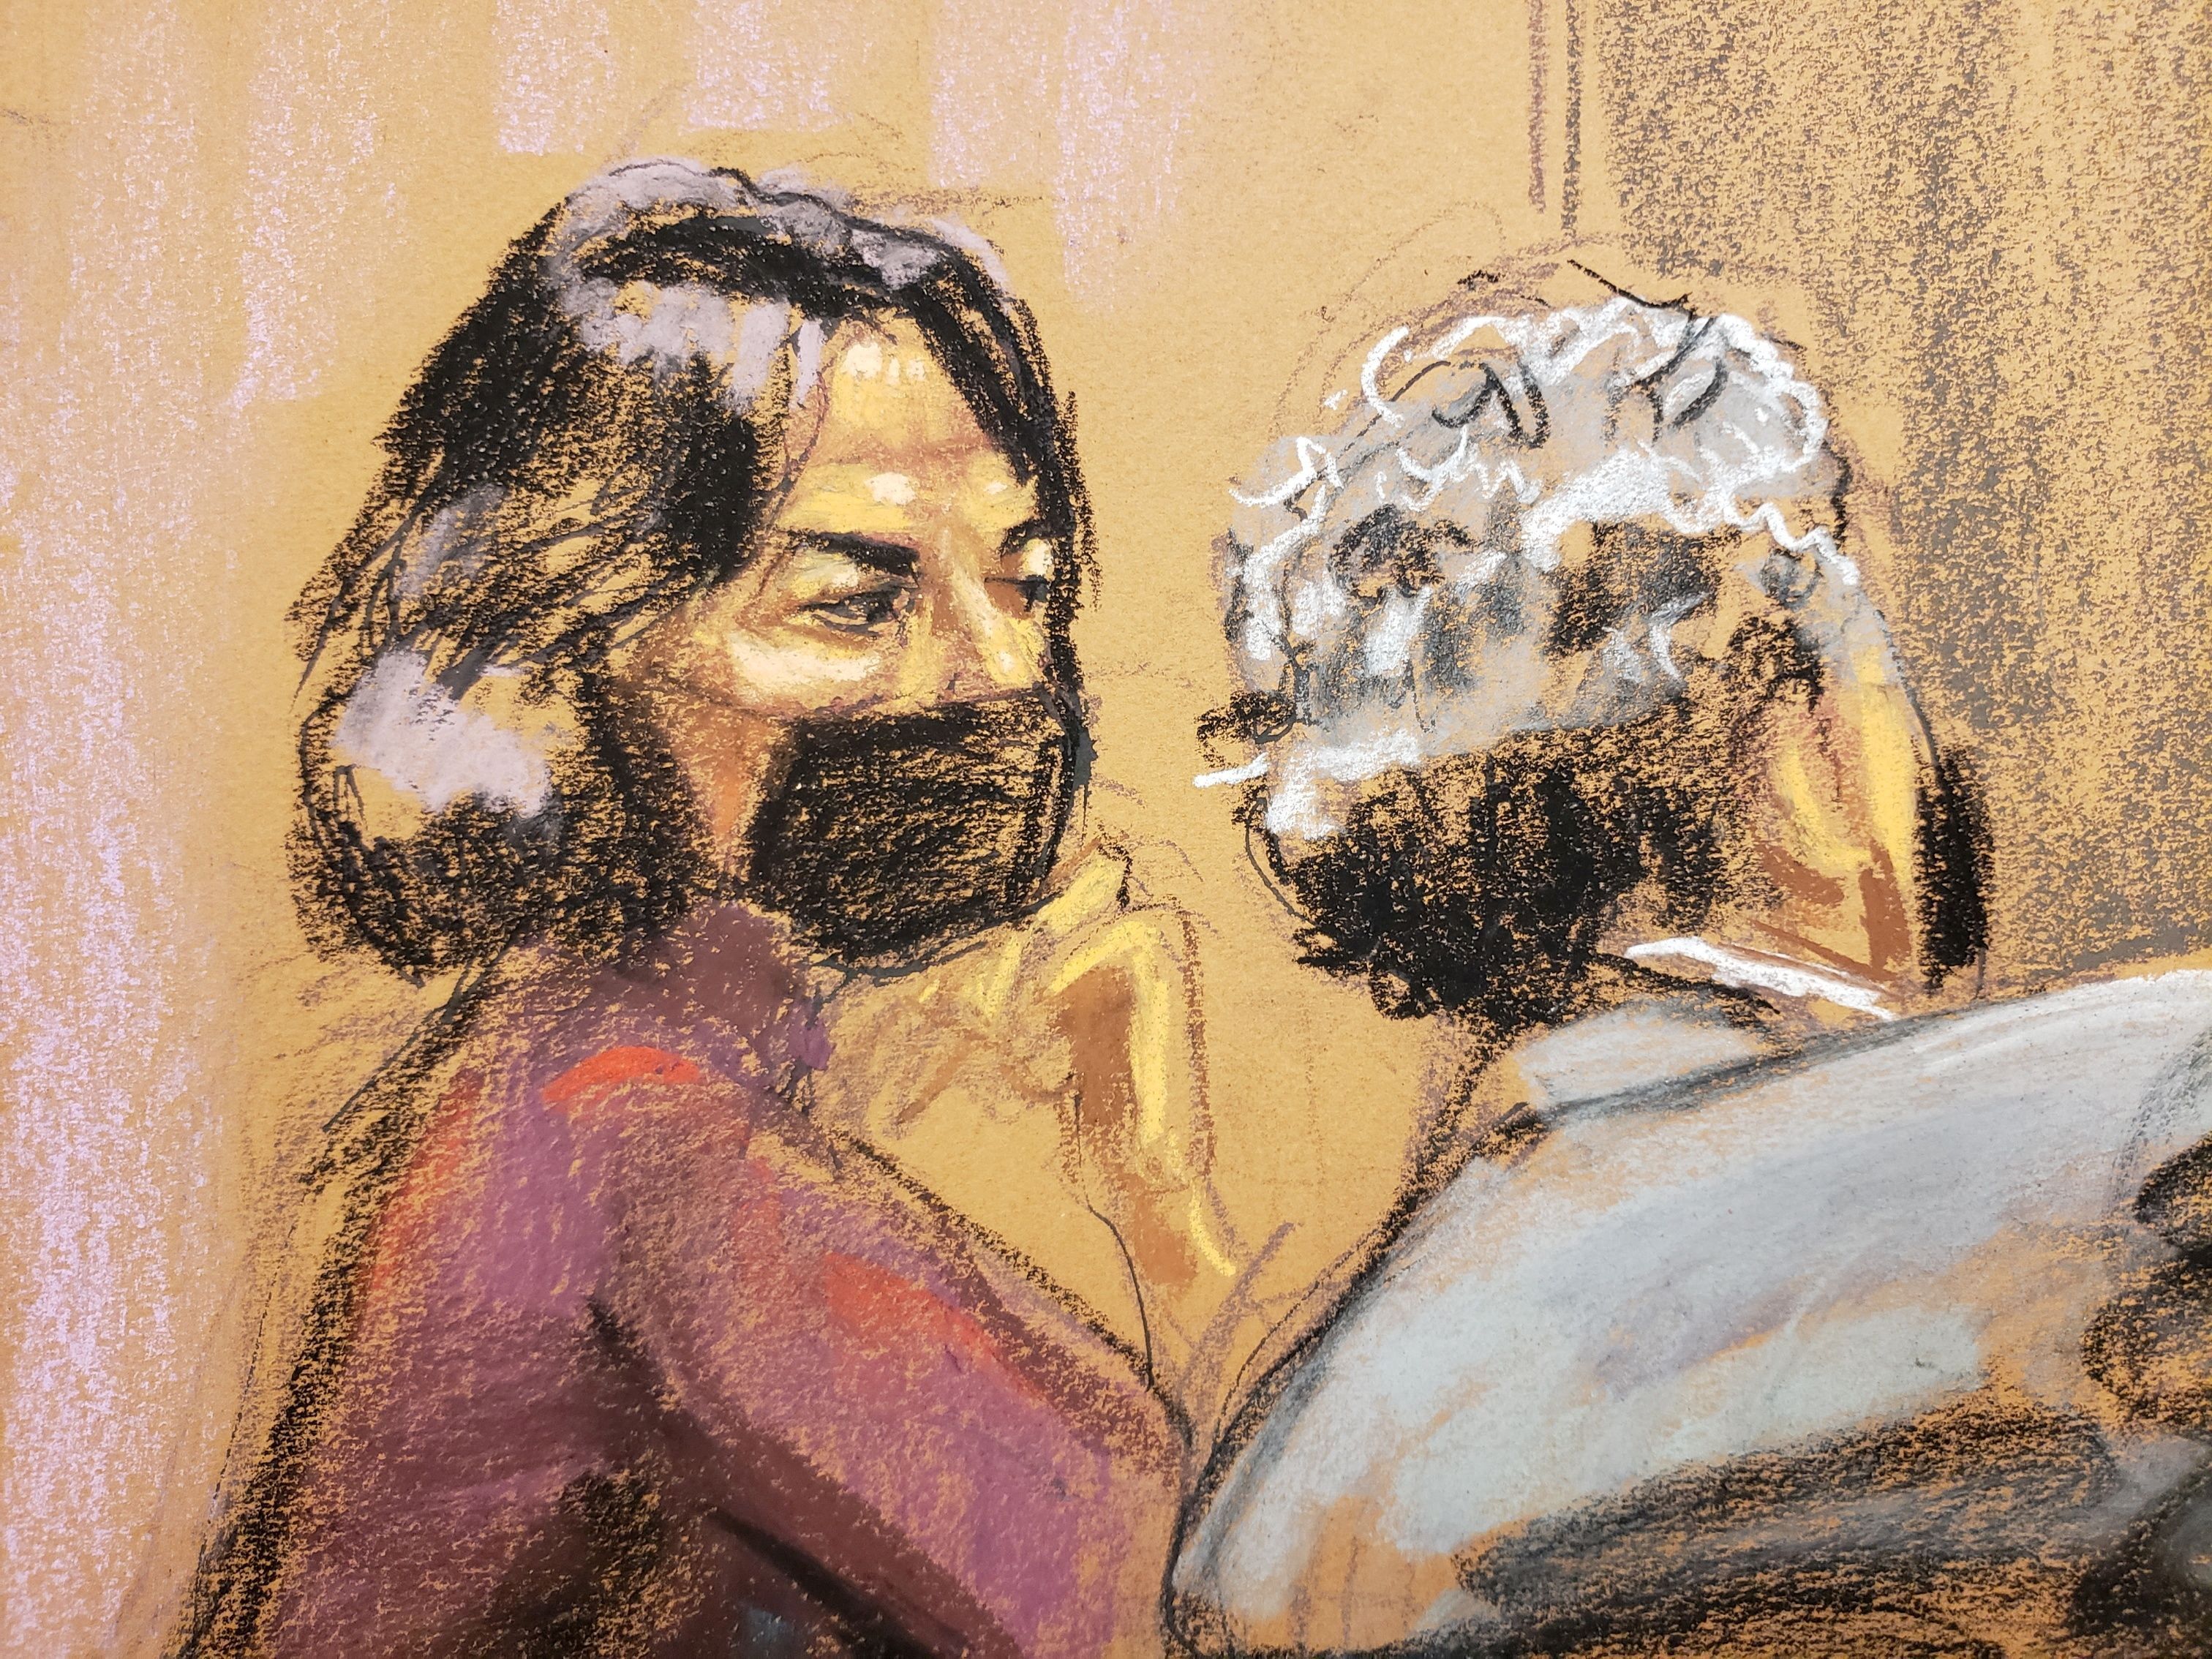 Defense attorney Jeffrey Pagliuca speaks with Jeffrey Epstein associate Ghislaine Maxwell during her trial in a courtroom sketch in New York City, U.S., December 29, 2021. REUTERS/Jane Rosenberg/File Photo